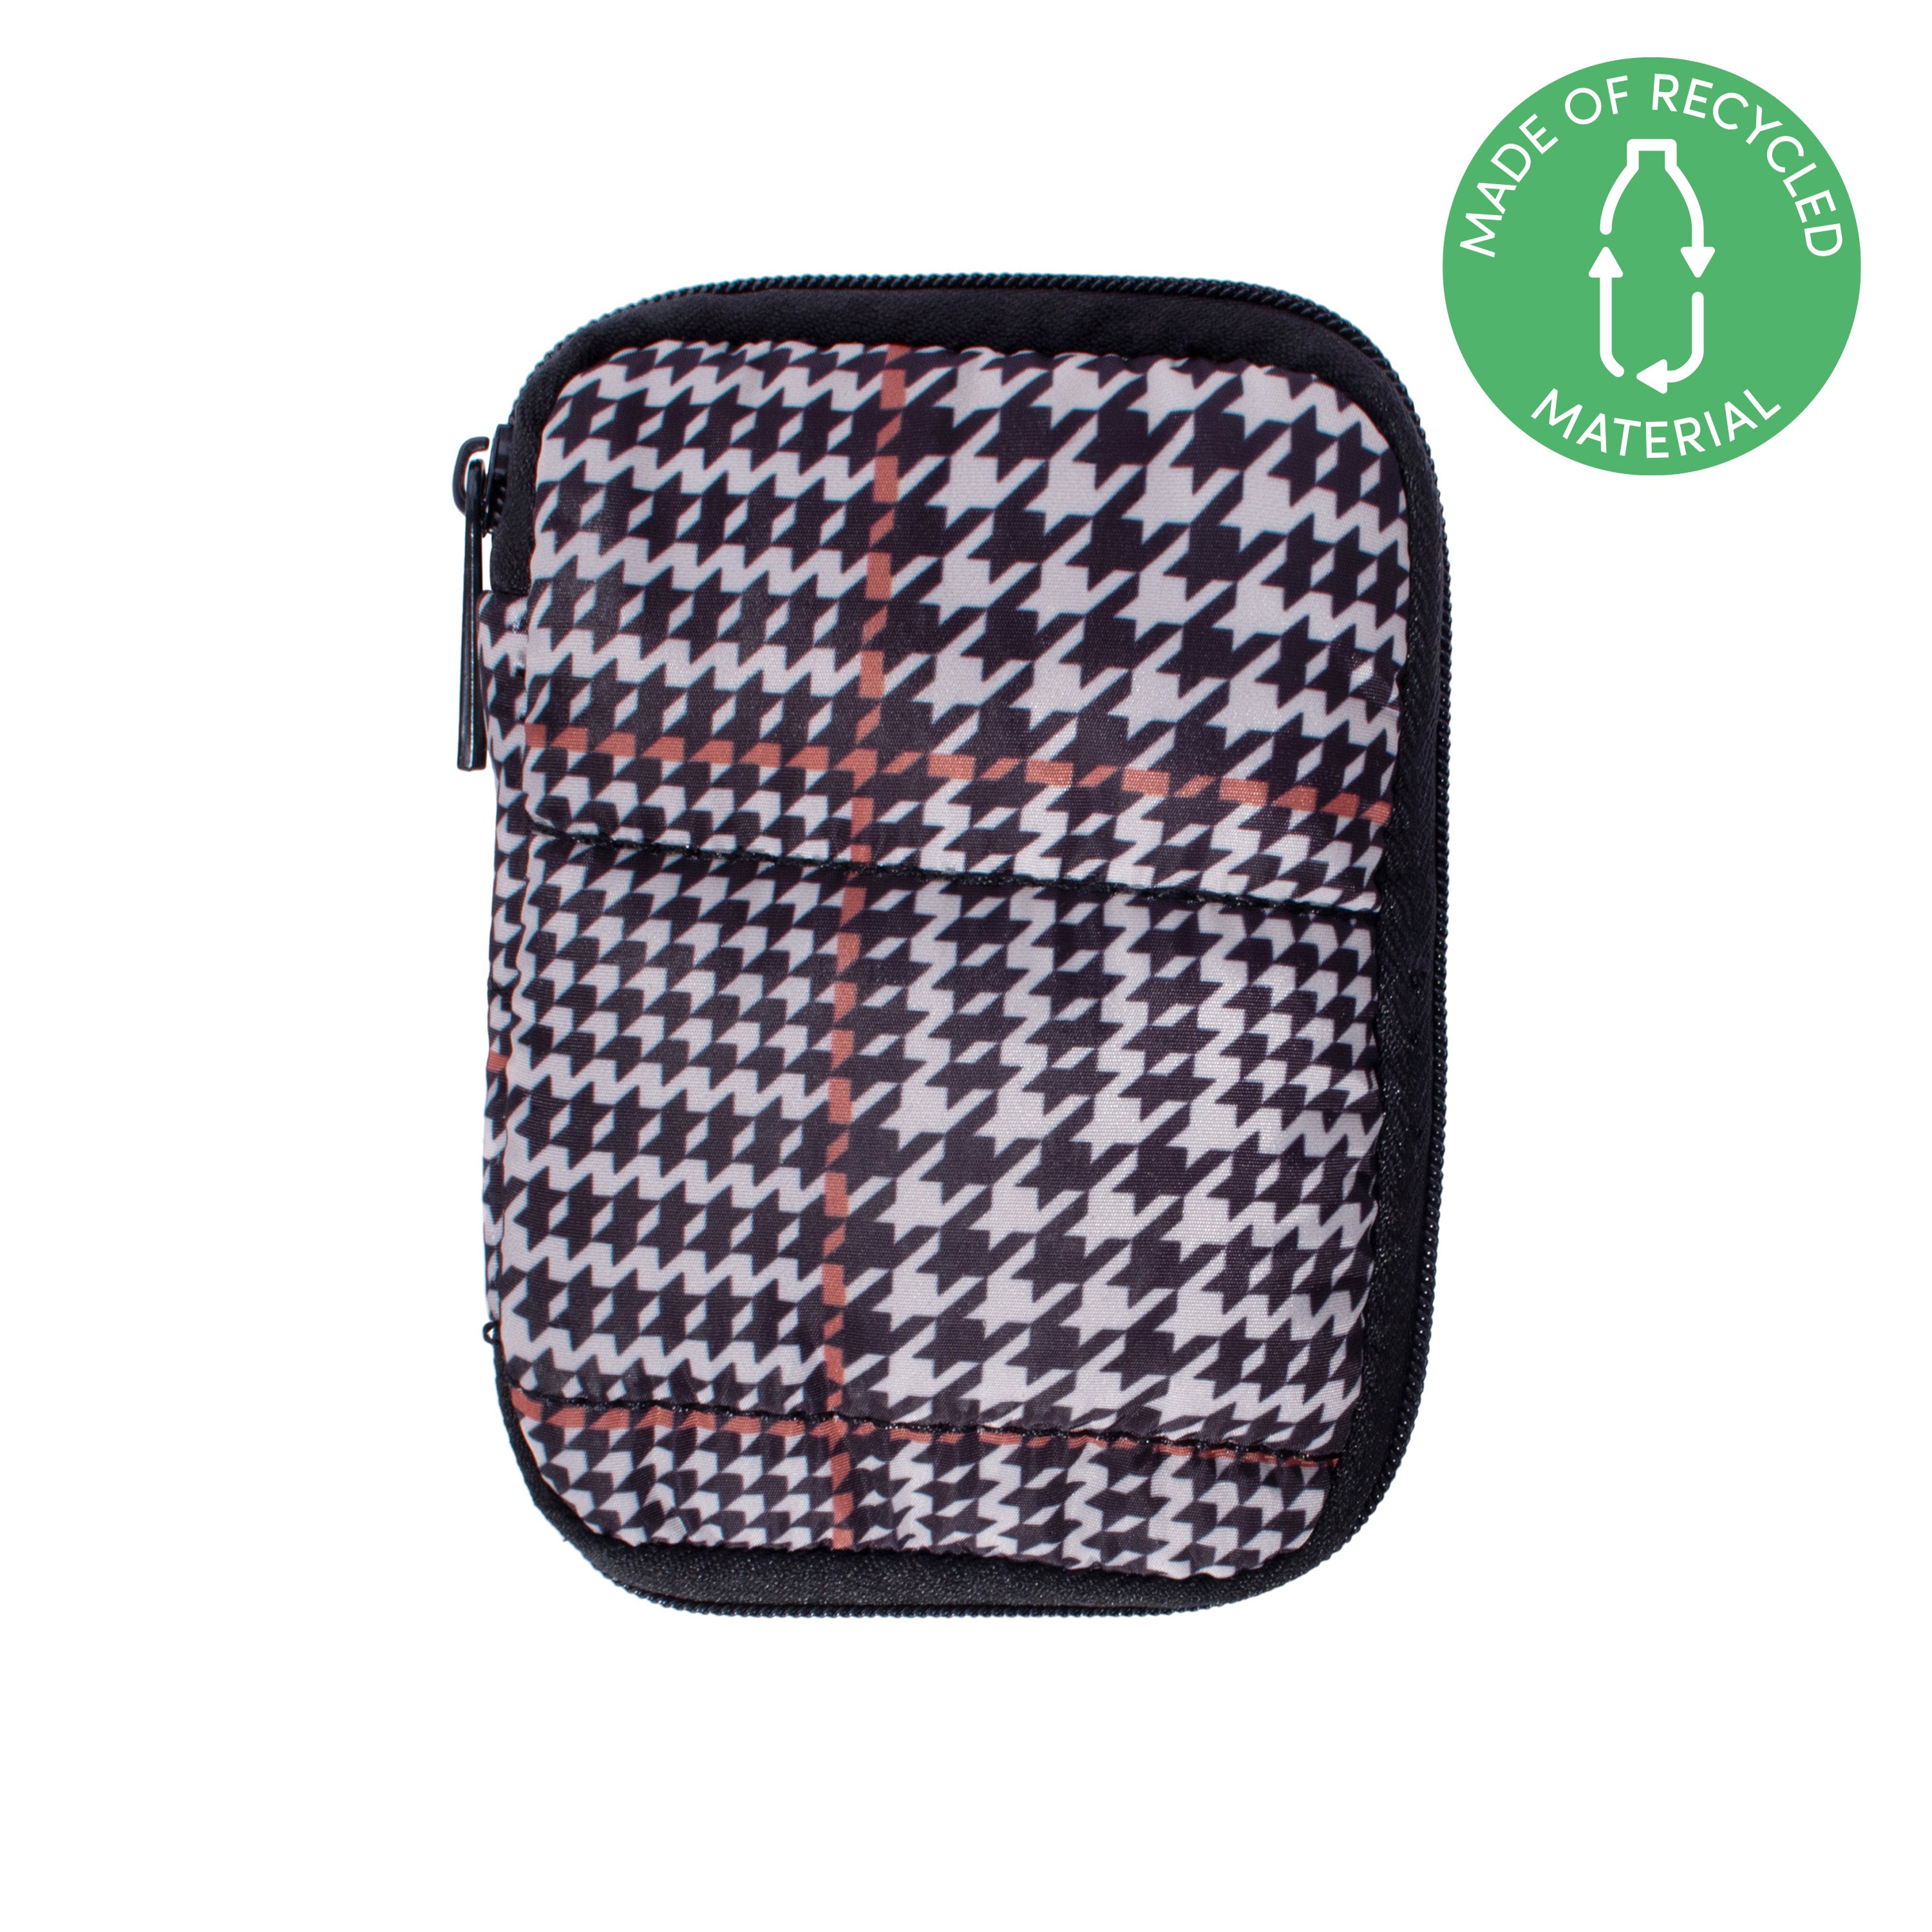 houndstooth earbud case made from recycled plastic bottles